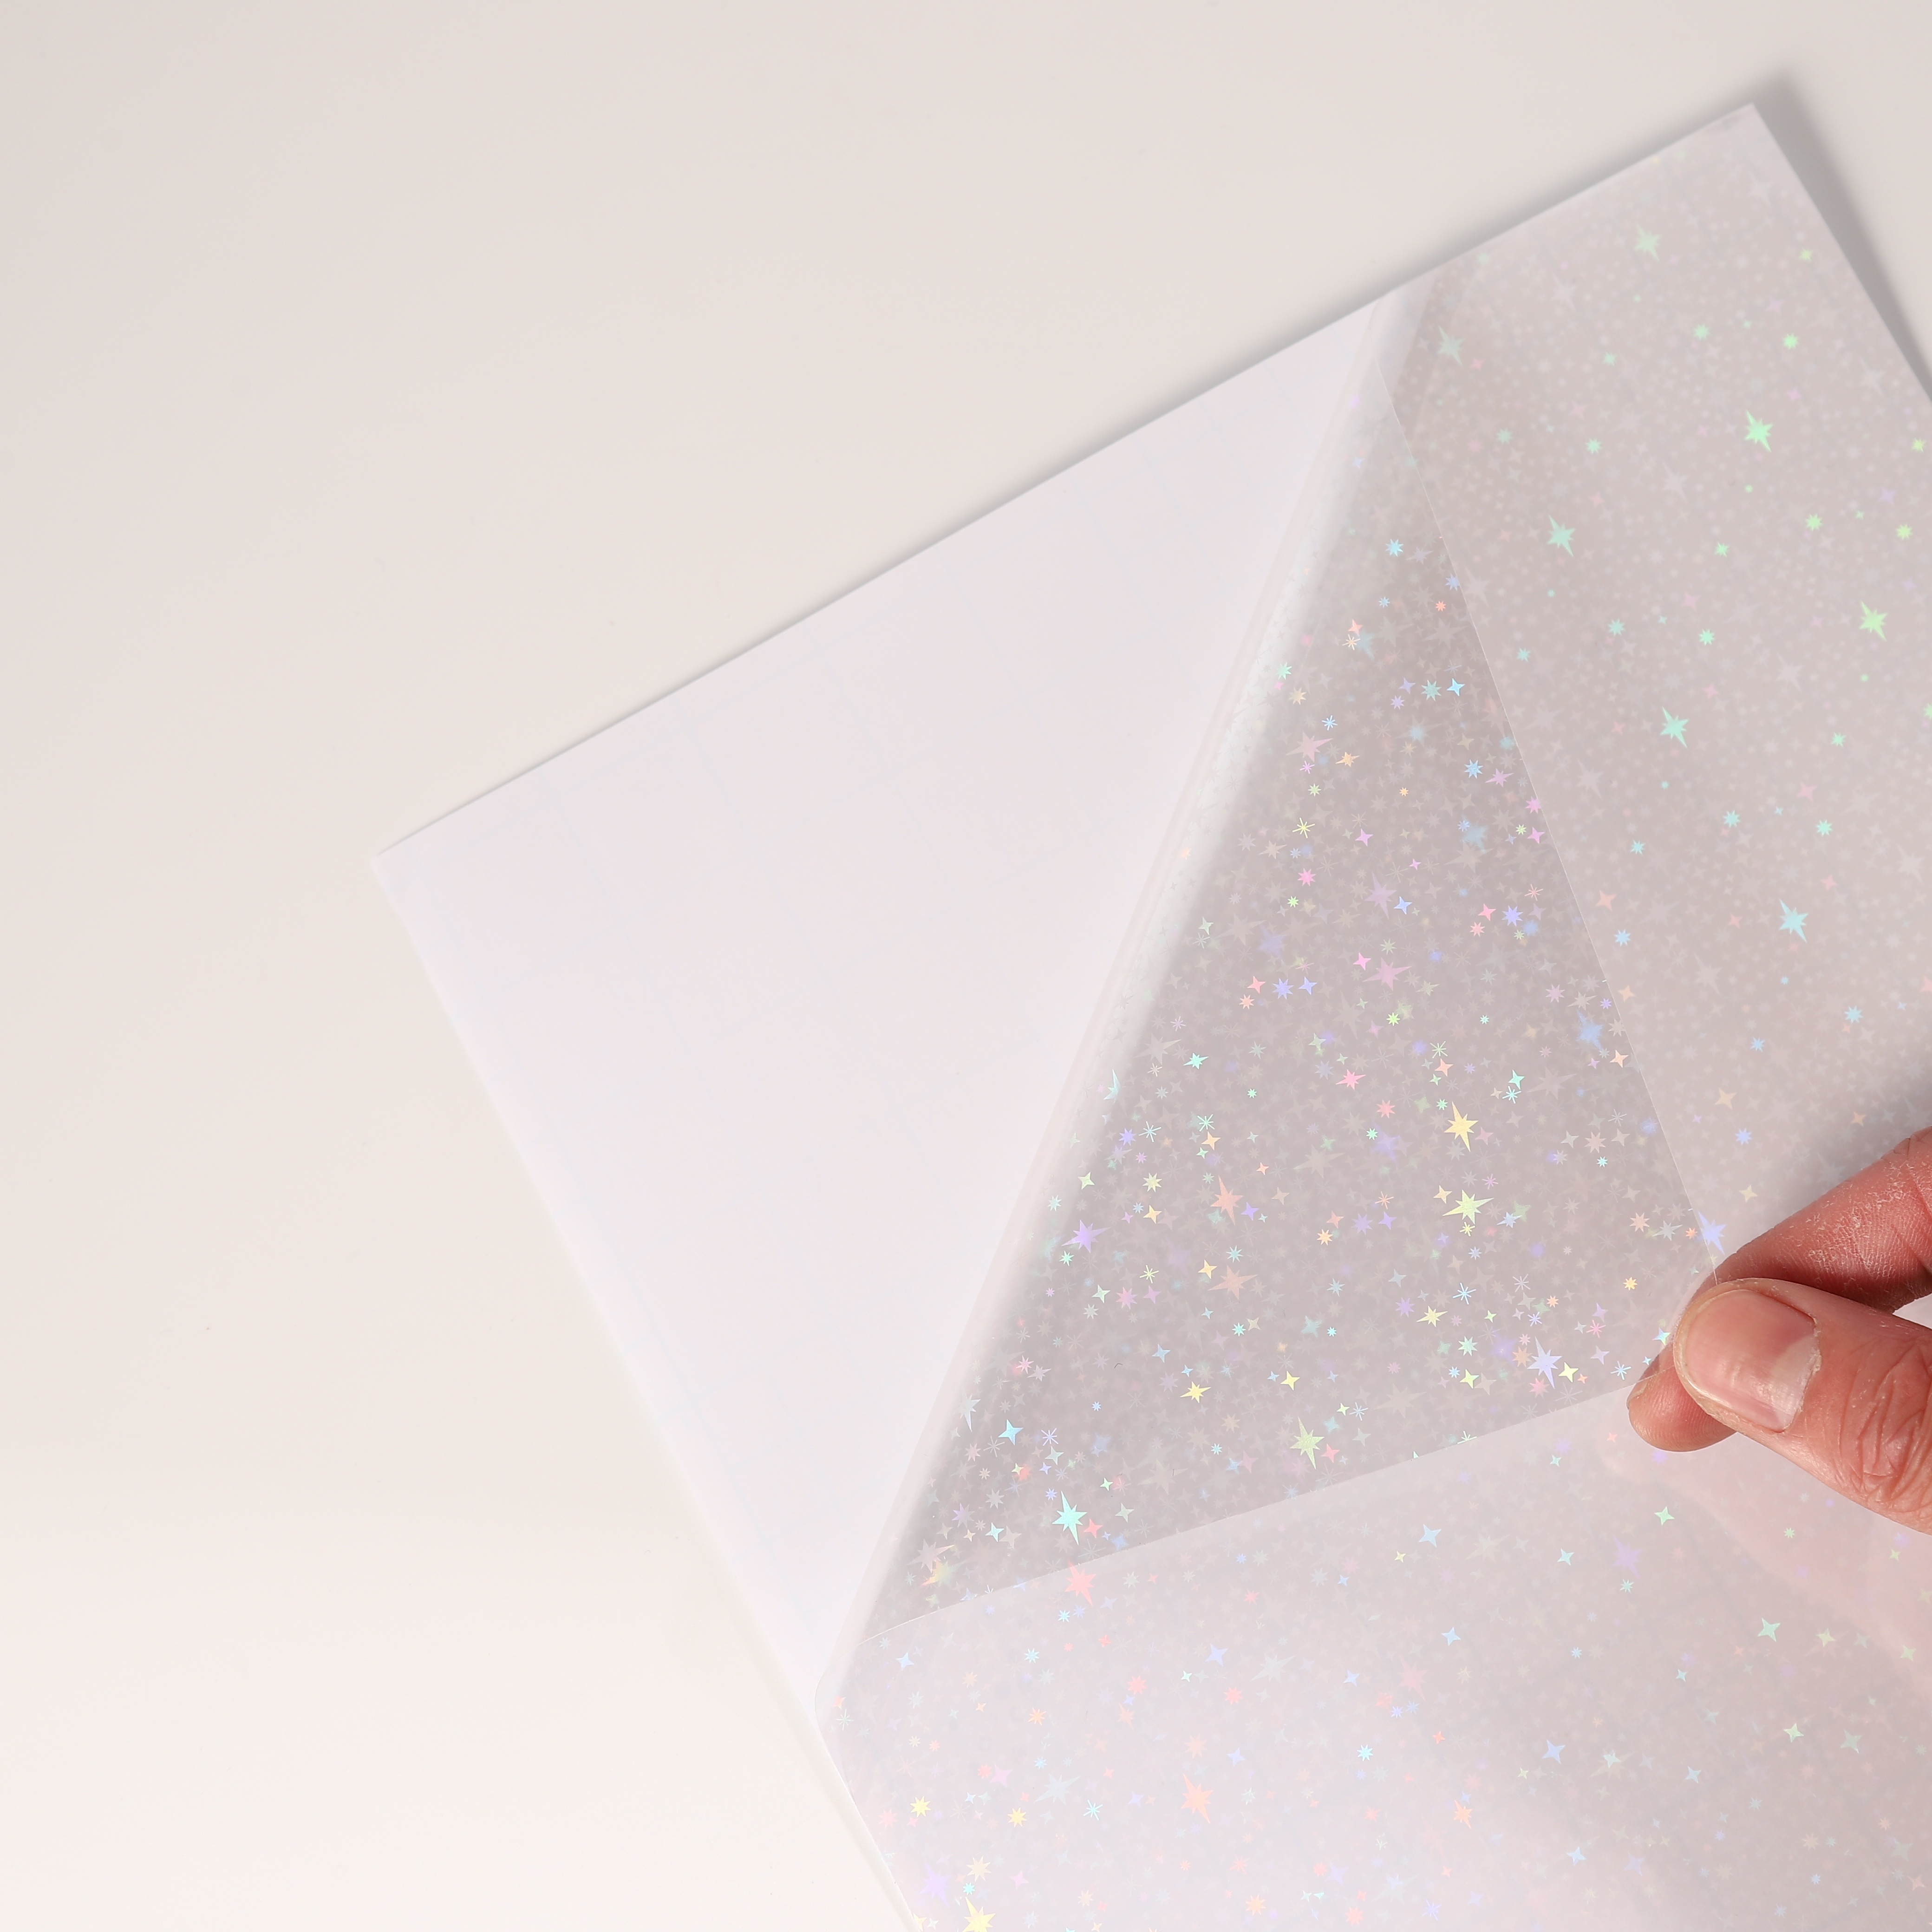 

50-pack Pvc Holographic Star Overlay Adhesive Vinyl Film Sheets 4.1x2.9" For Stickers And Crafts - Cold Laminated, Durable And Shiny Finish